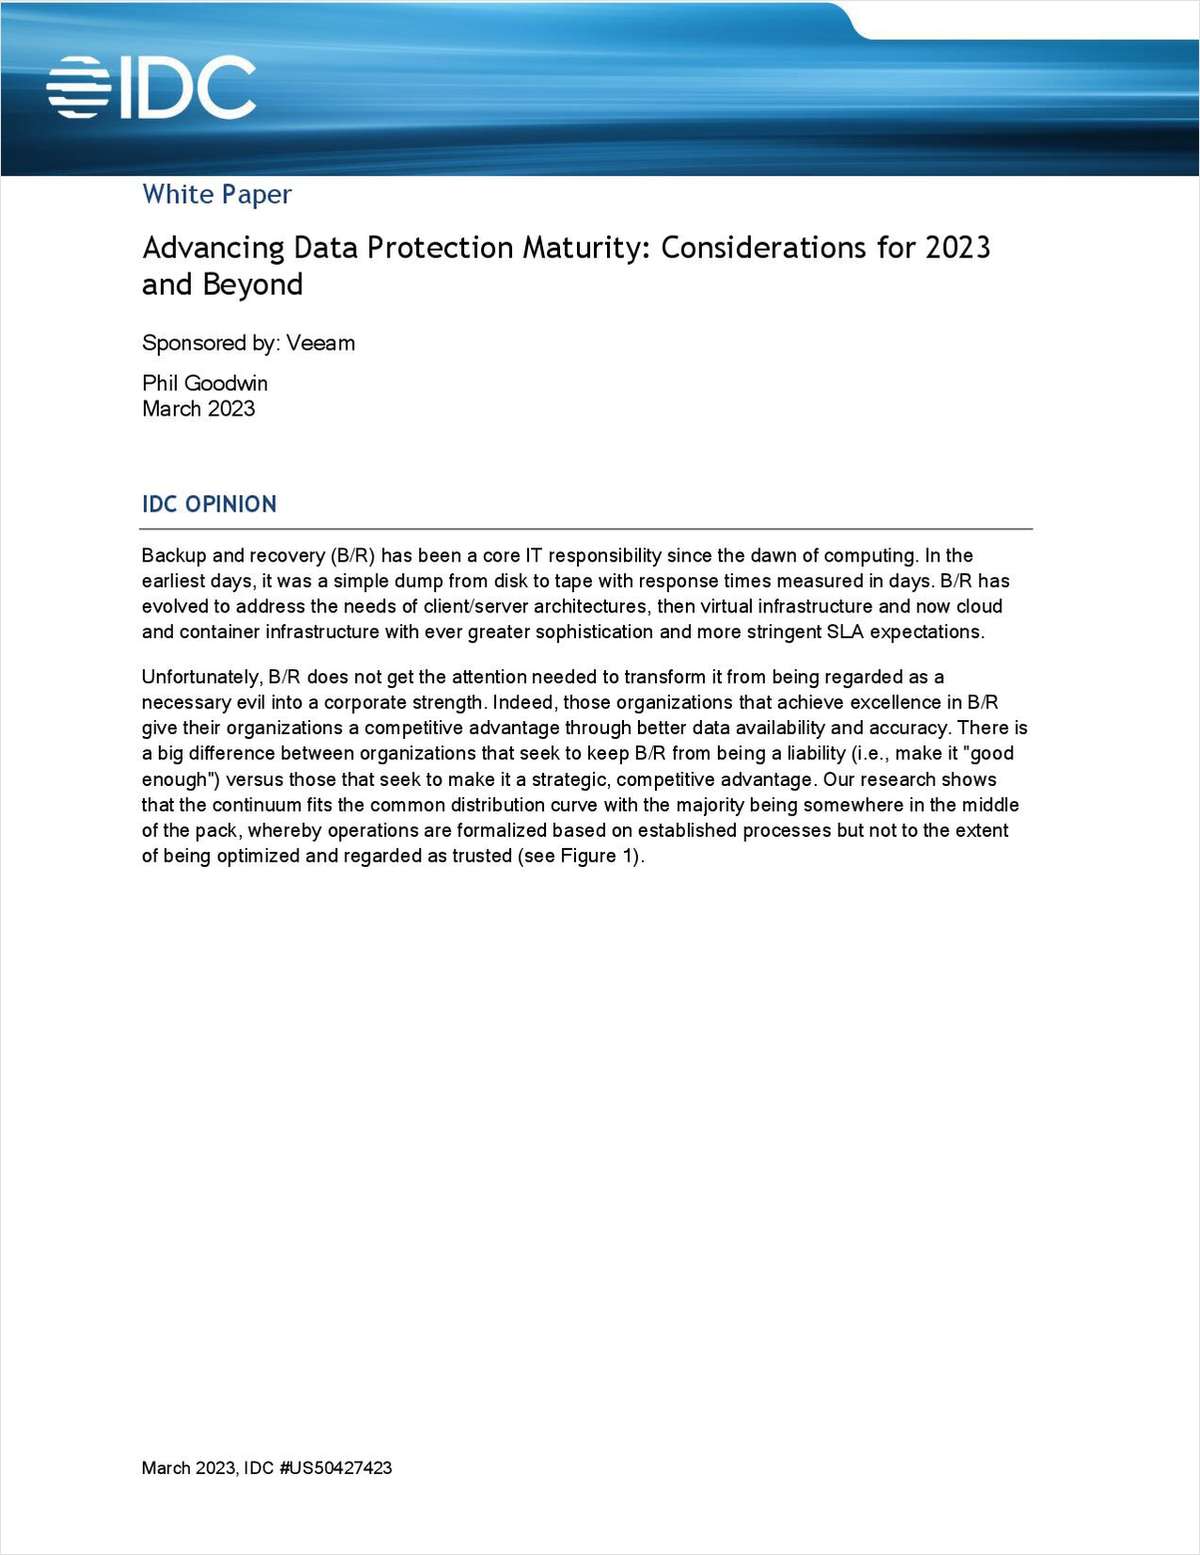 Advancing Data Protection Maturity: Considerations for 2023 and Beyond